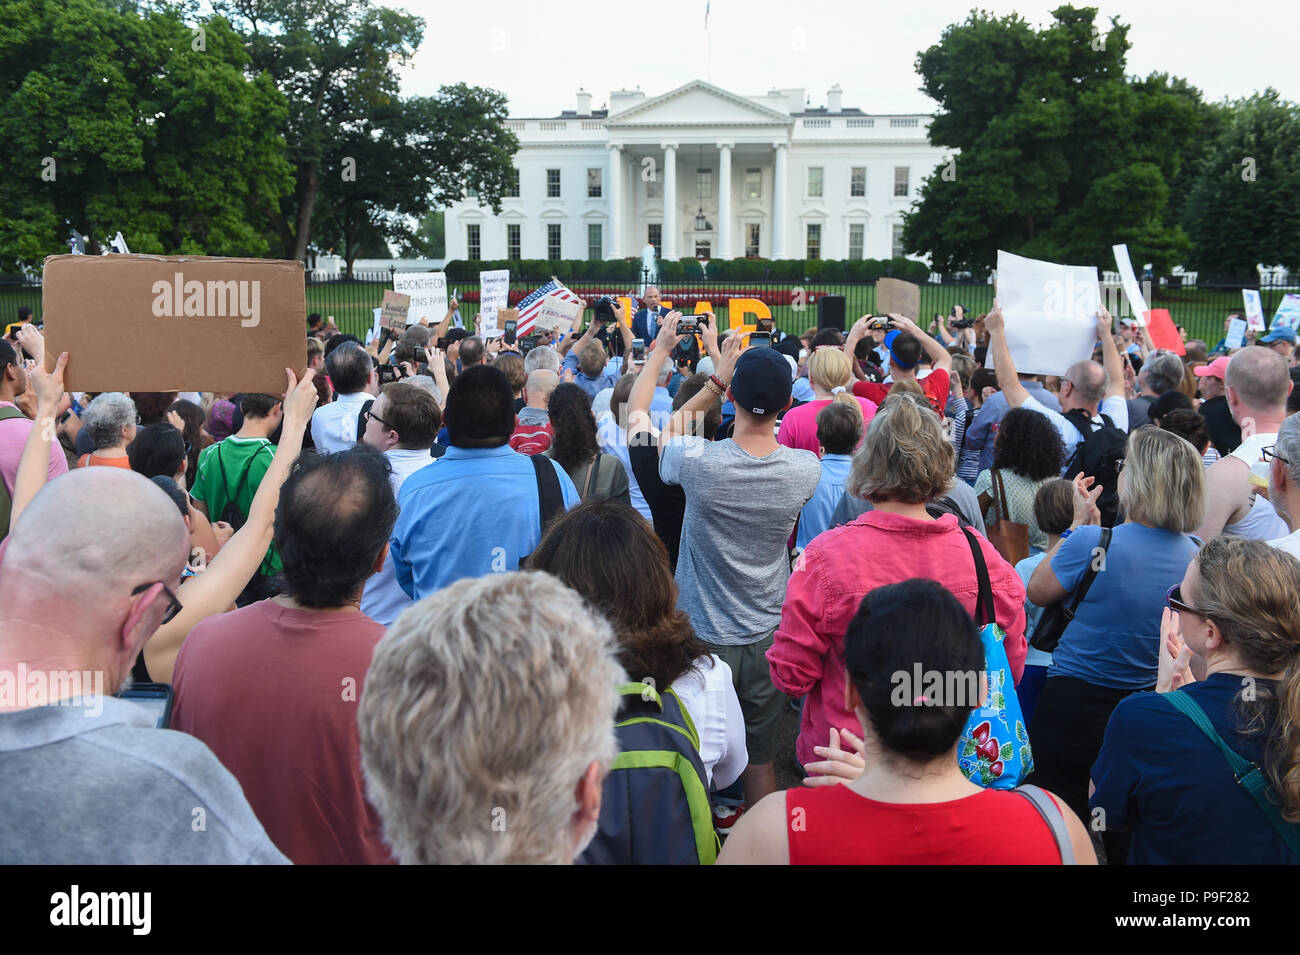 Washington DC, USA. 17th July 2018. Michael Avenatti speaks to the crowd at an event he organized during a protest in front of the White House, just two days after Donald Trump's gaffs in Helsinki, Finland with Vladimir Putin. Credit: Cal Sport Media/Alamy Live News Stock Photo